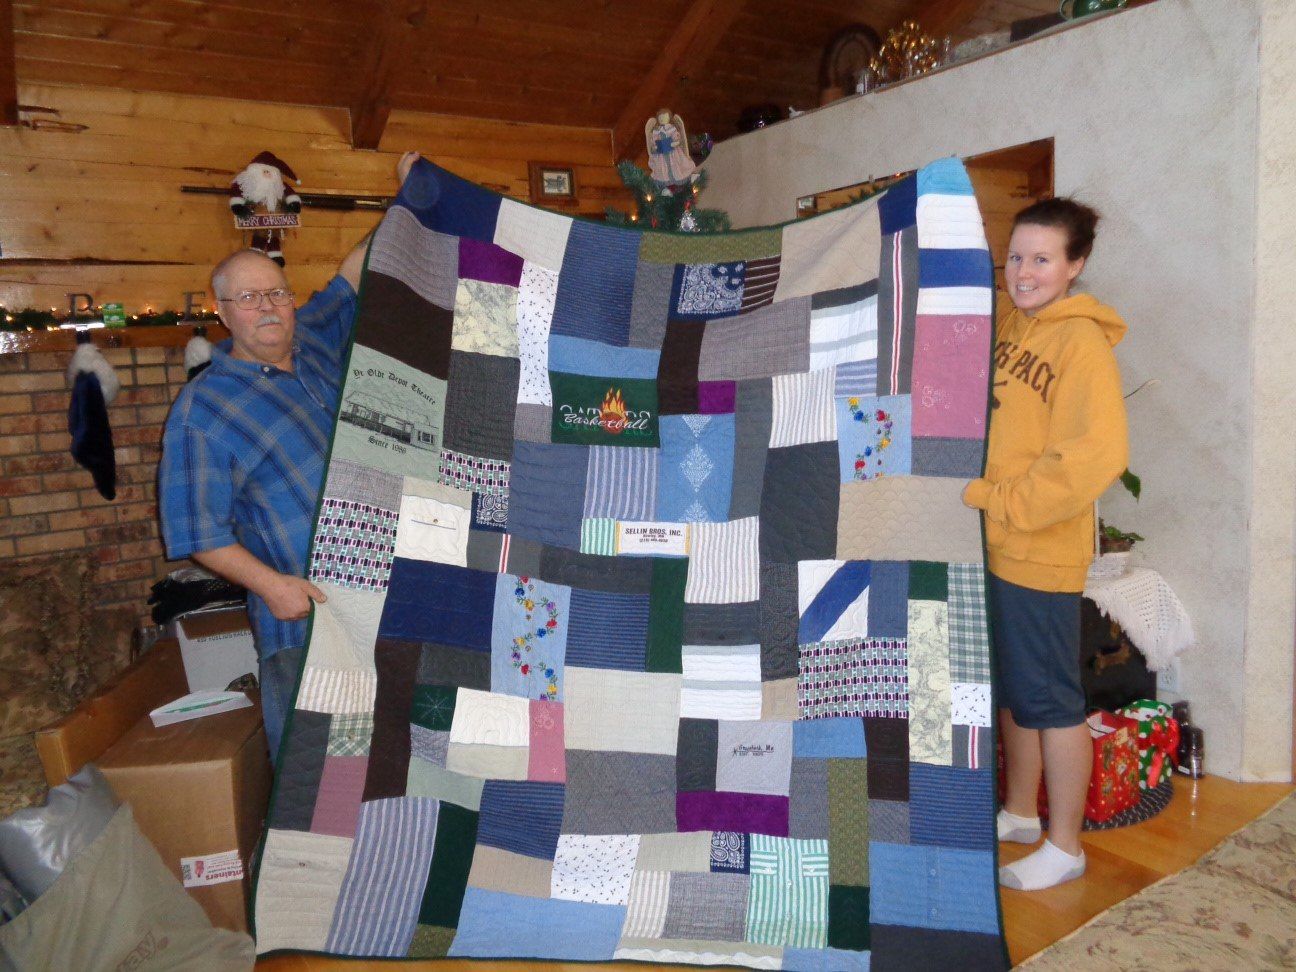 Nicki and Grandpa with a Too Cool T-shirt Quilt